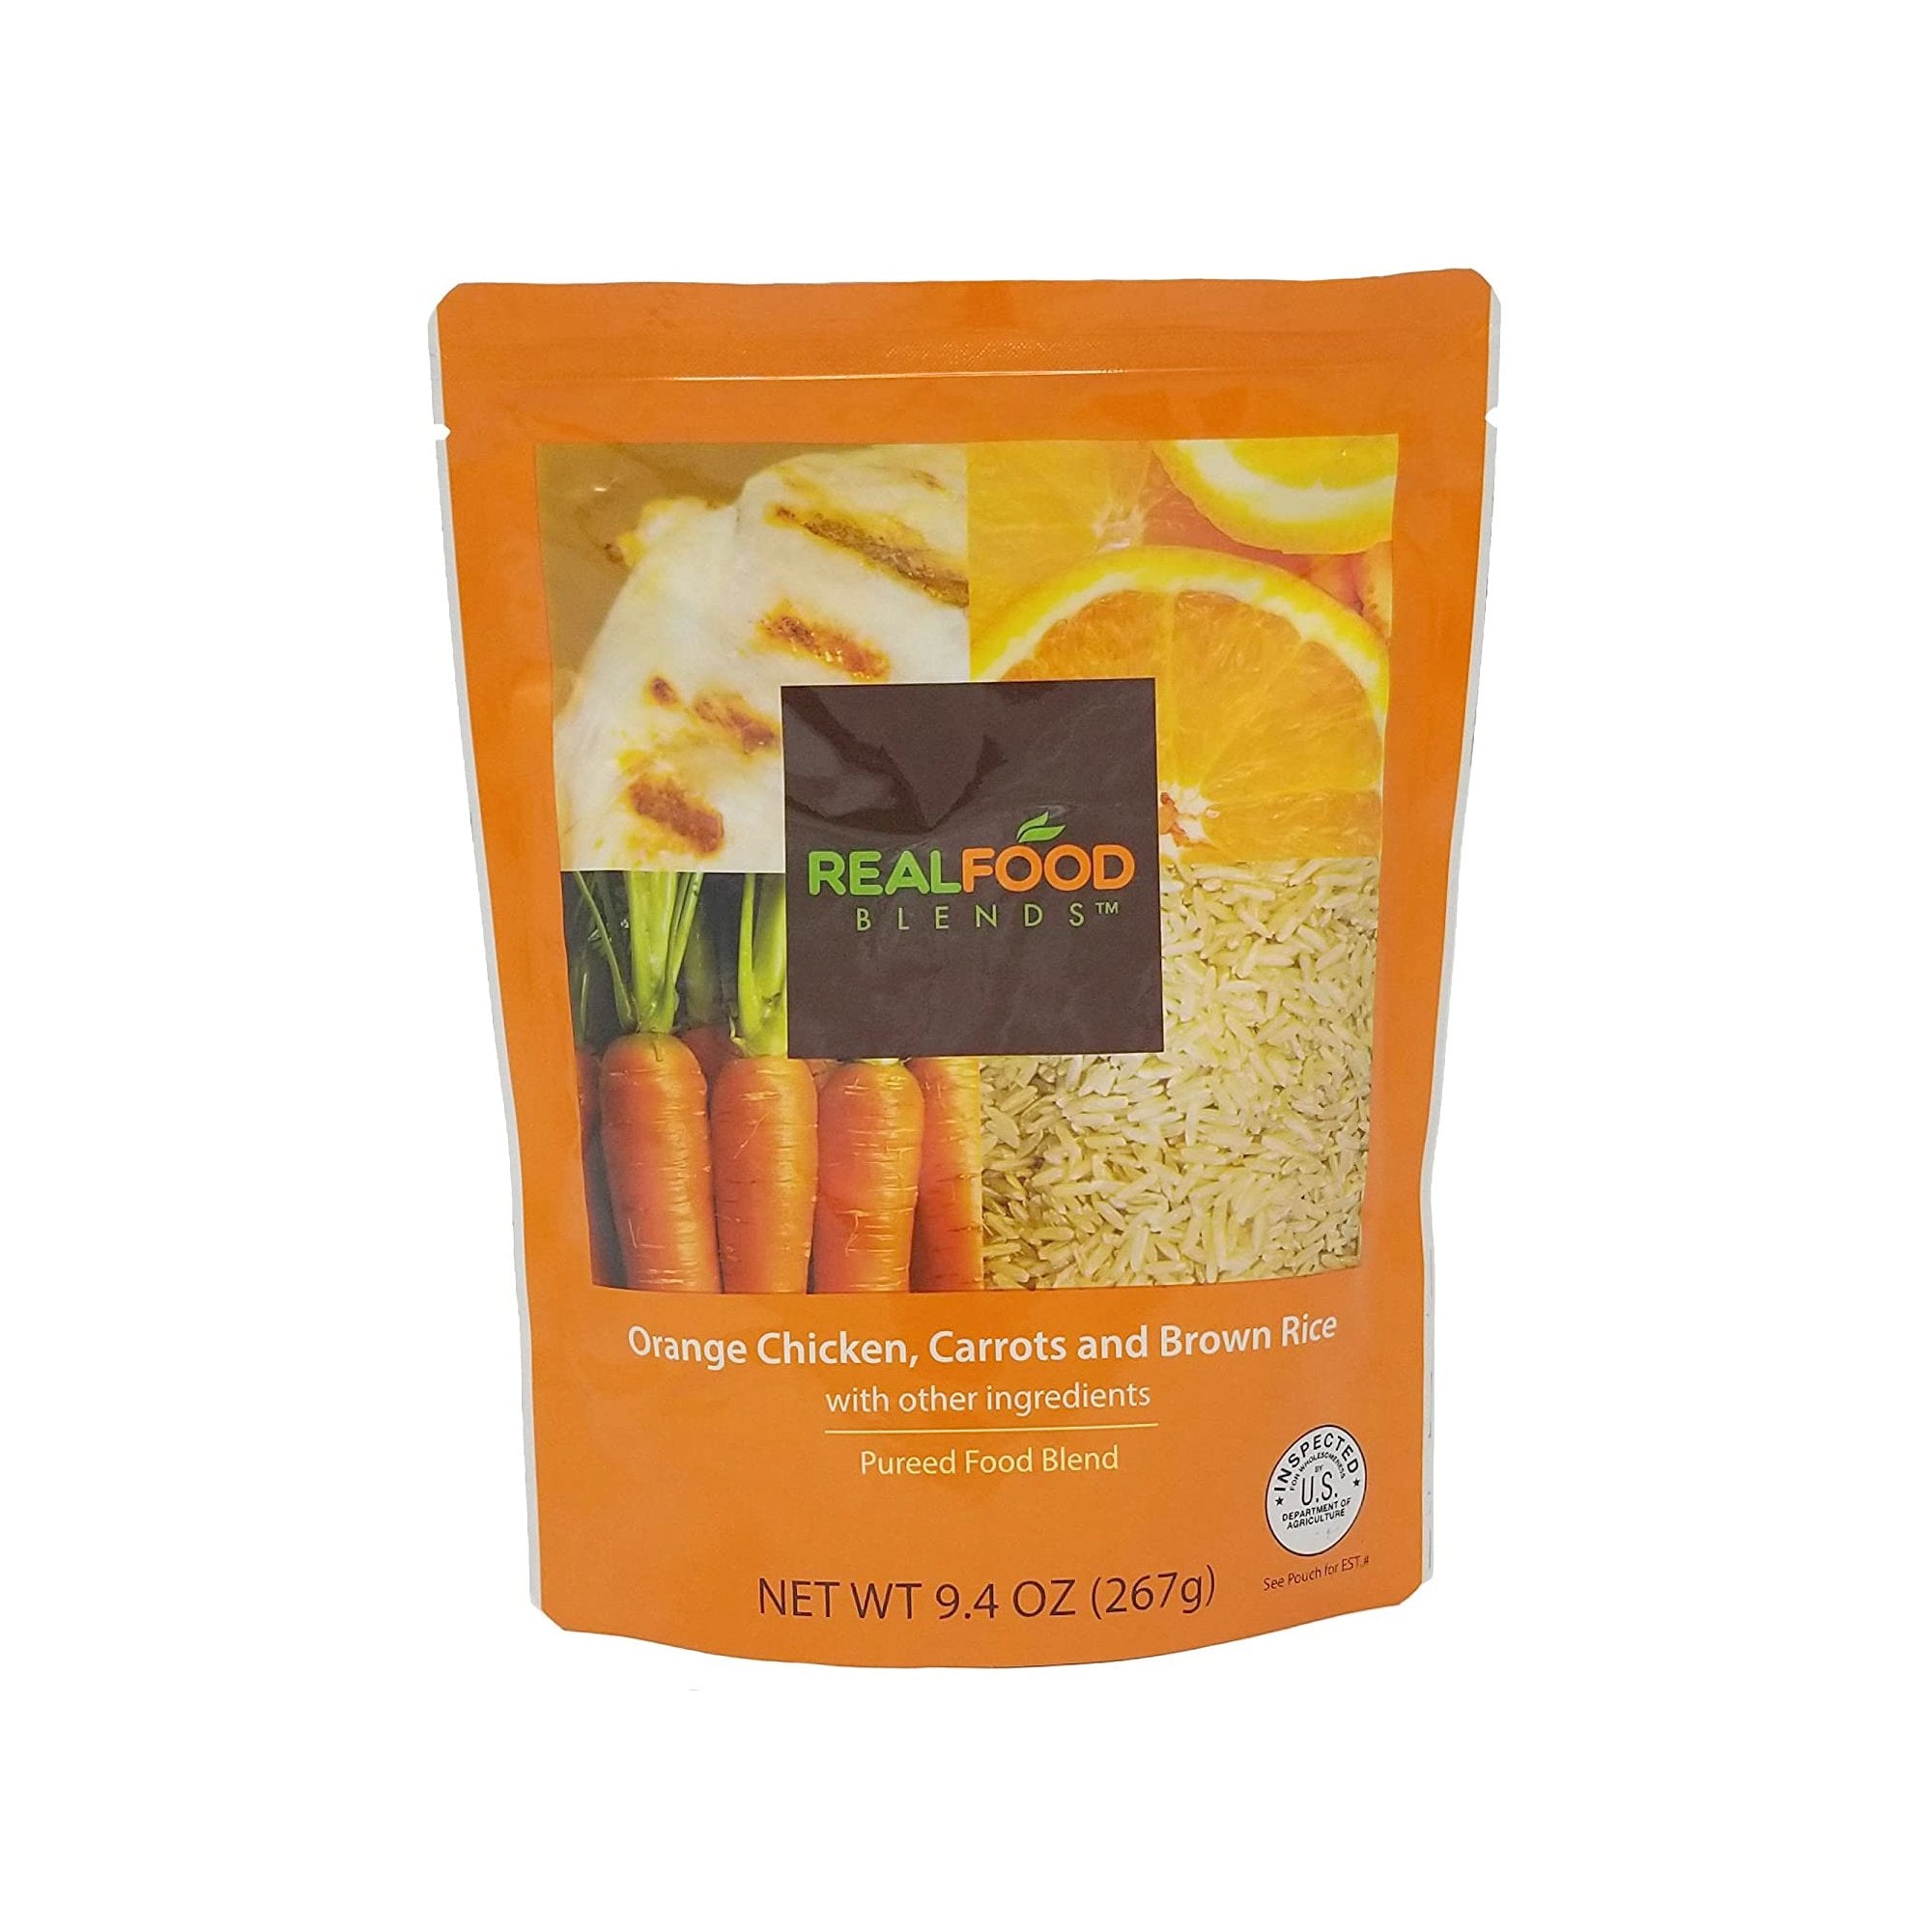 Real Food Blends Pureed Food Blends, Orange Chicken, Carrots & Brown Rice, 9.4 oz. Ready to Use Pouch -Case of 12